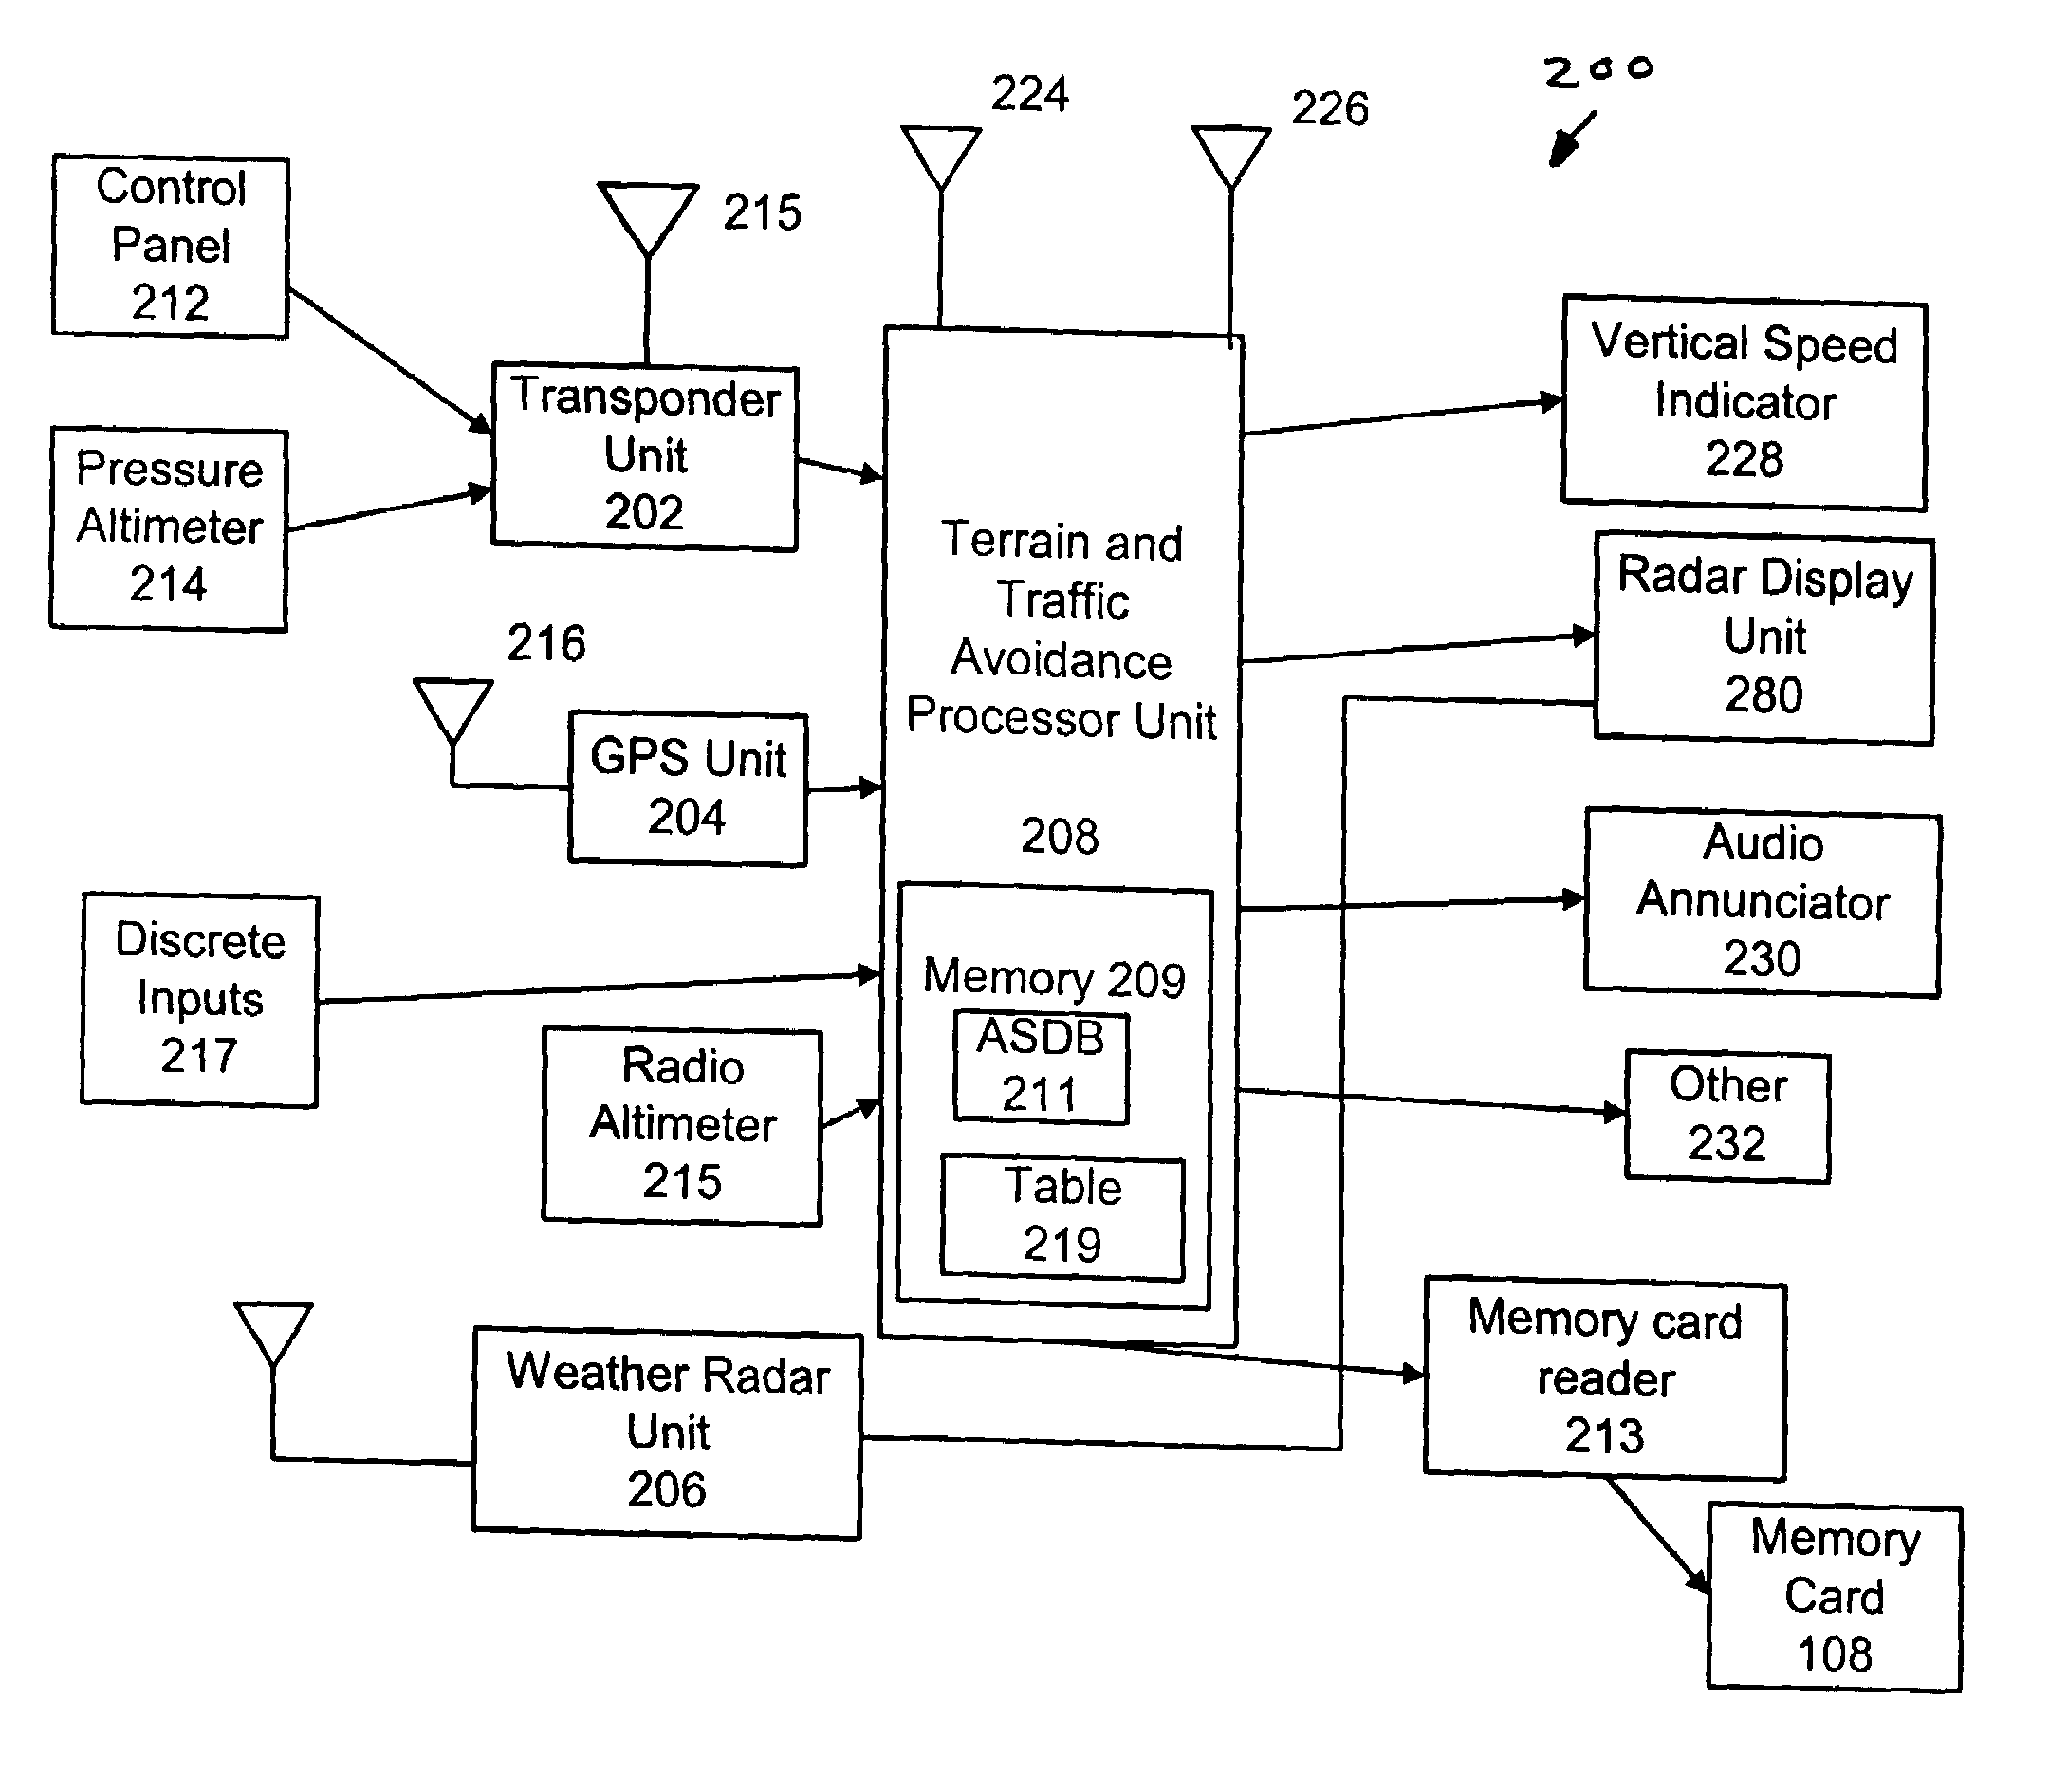 Method and system for selectively recording system information